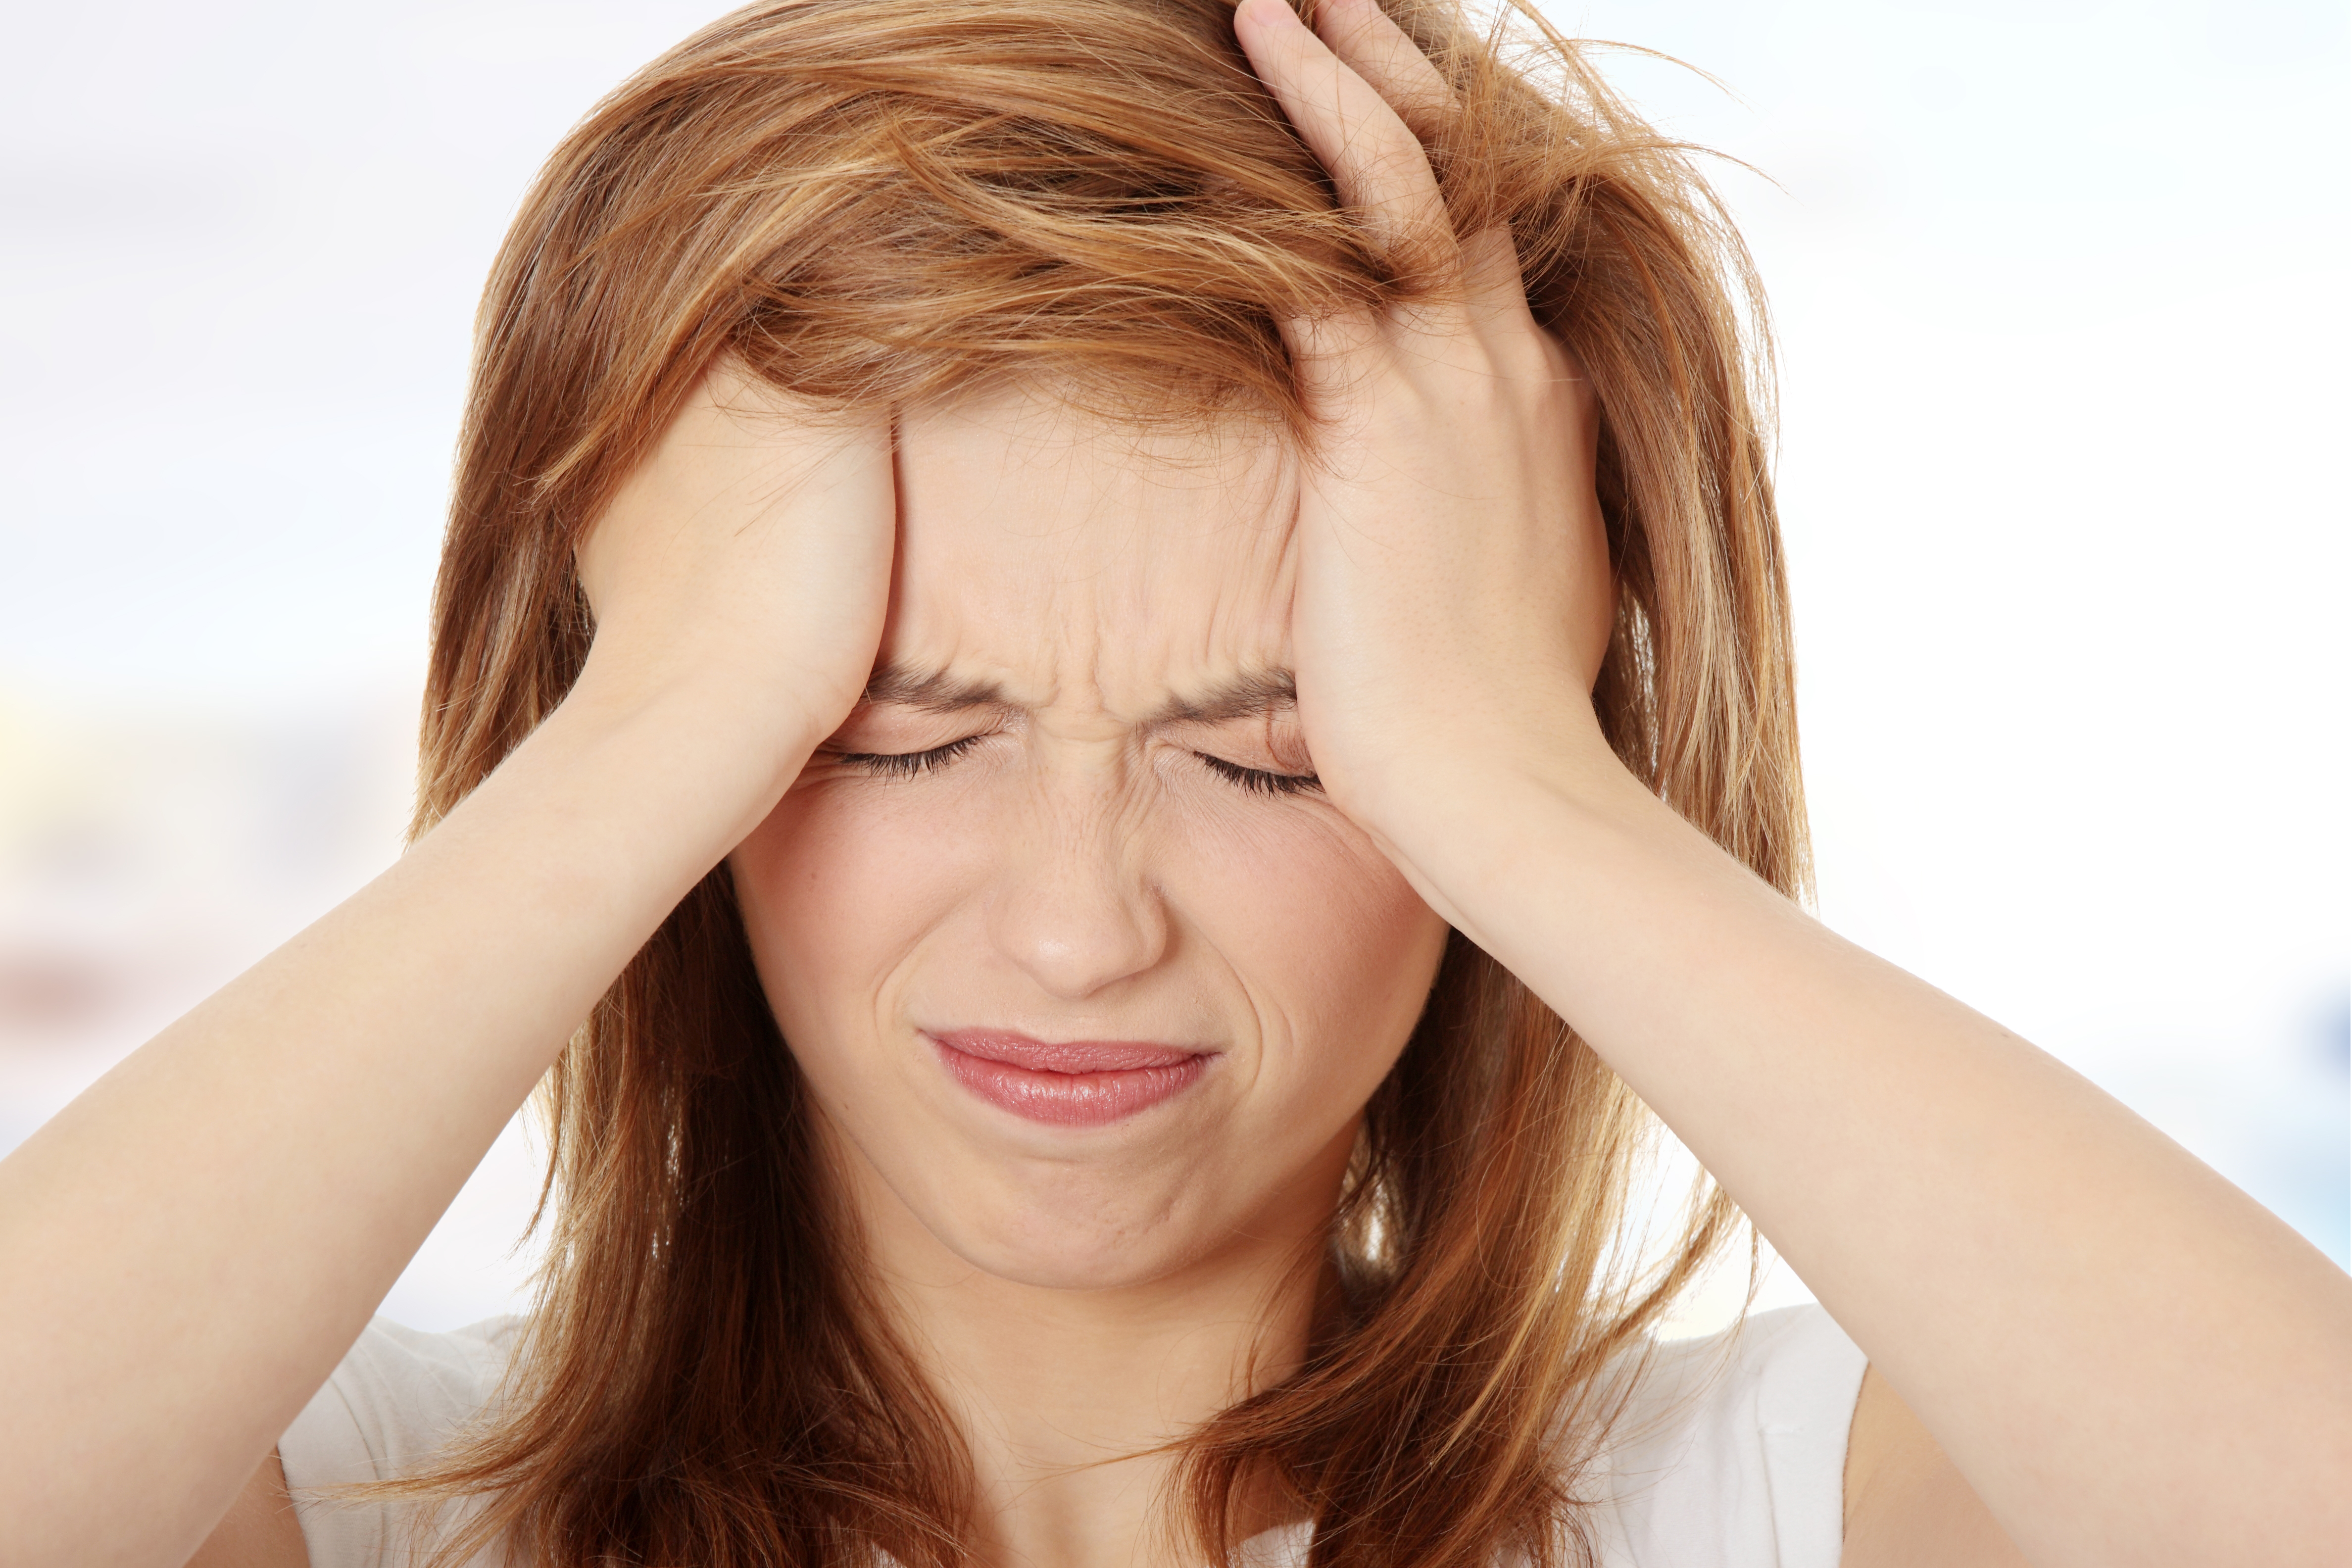 A migraine can be a very debilitating condition (source) 